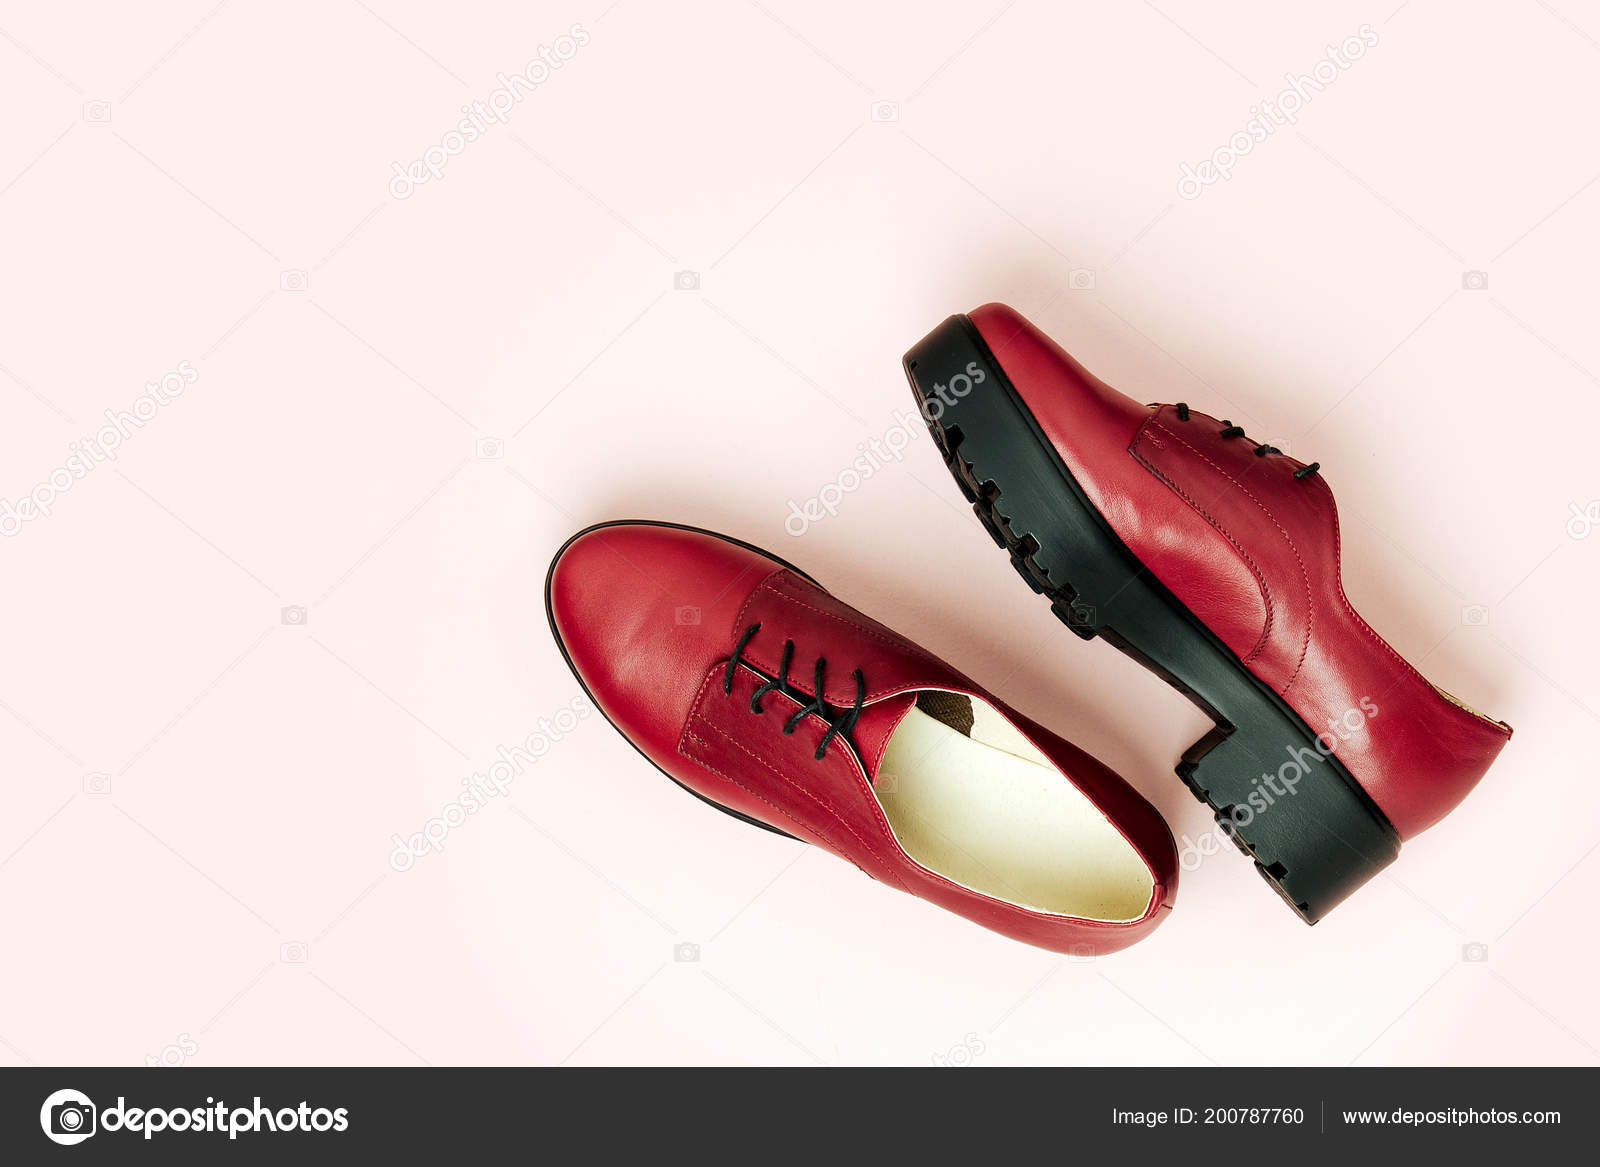 Fashionable shoes. Black and red shoes on a white background Stock